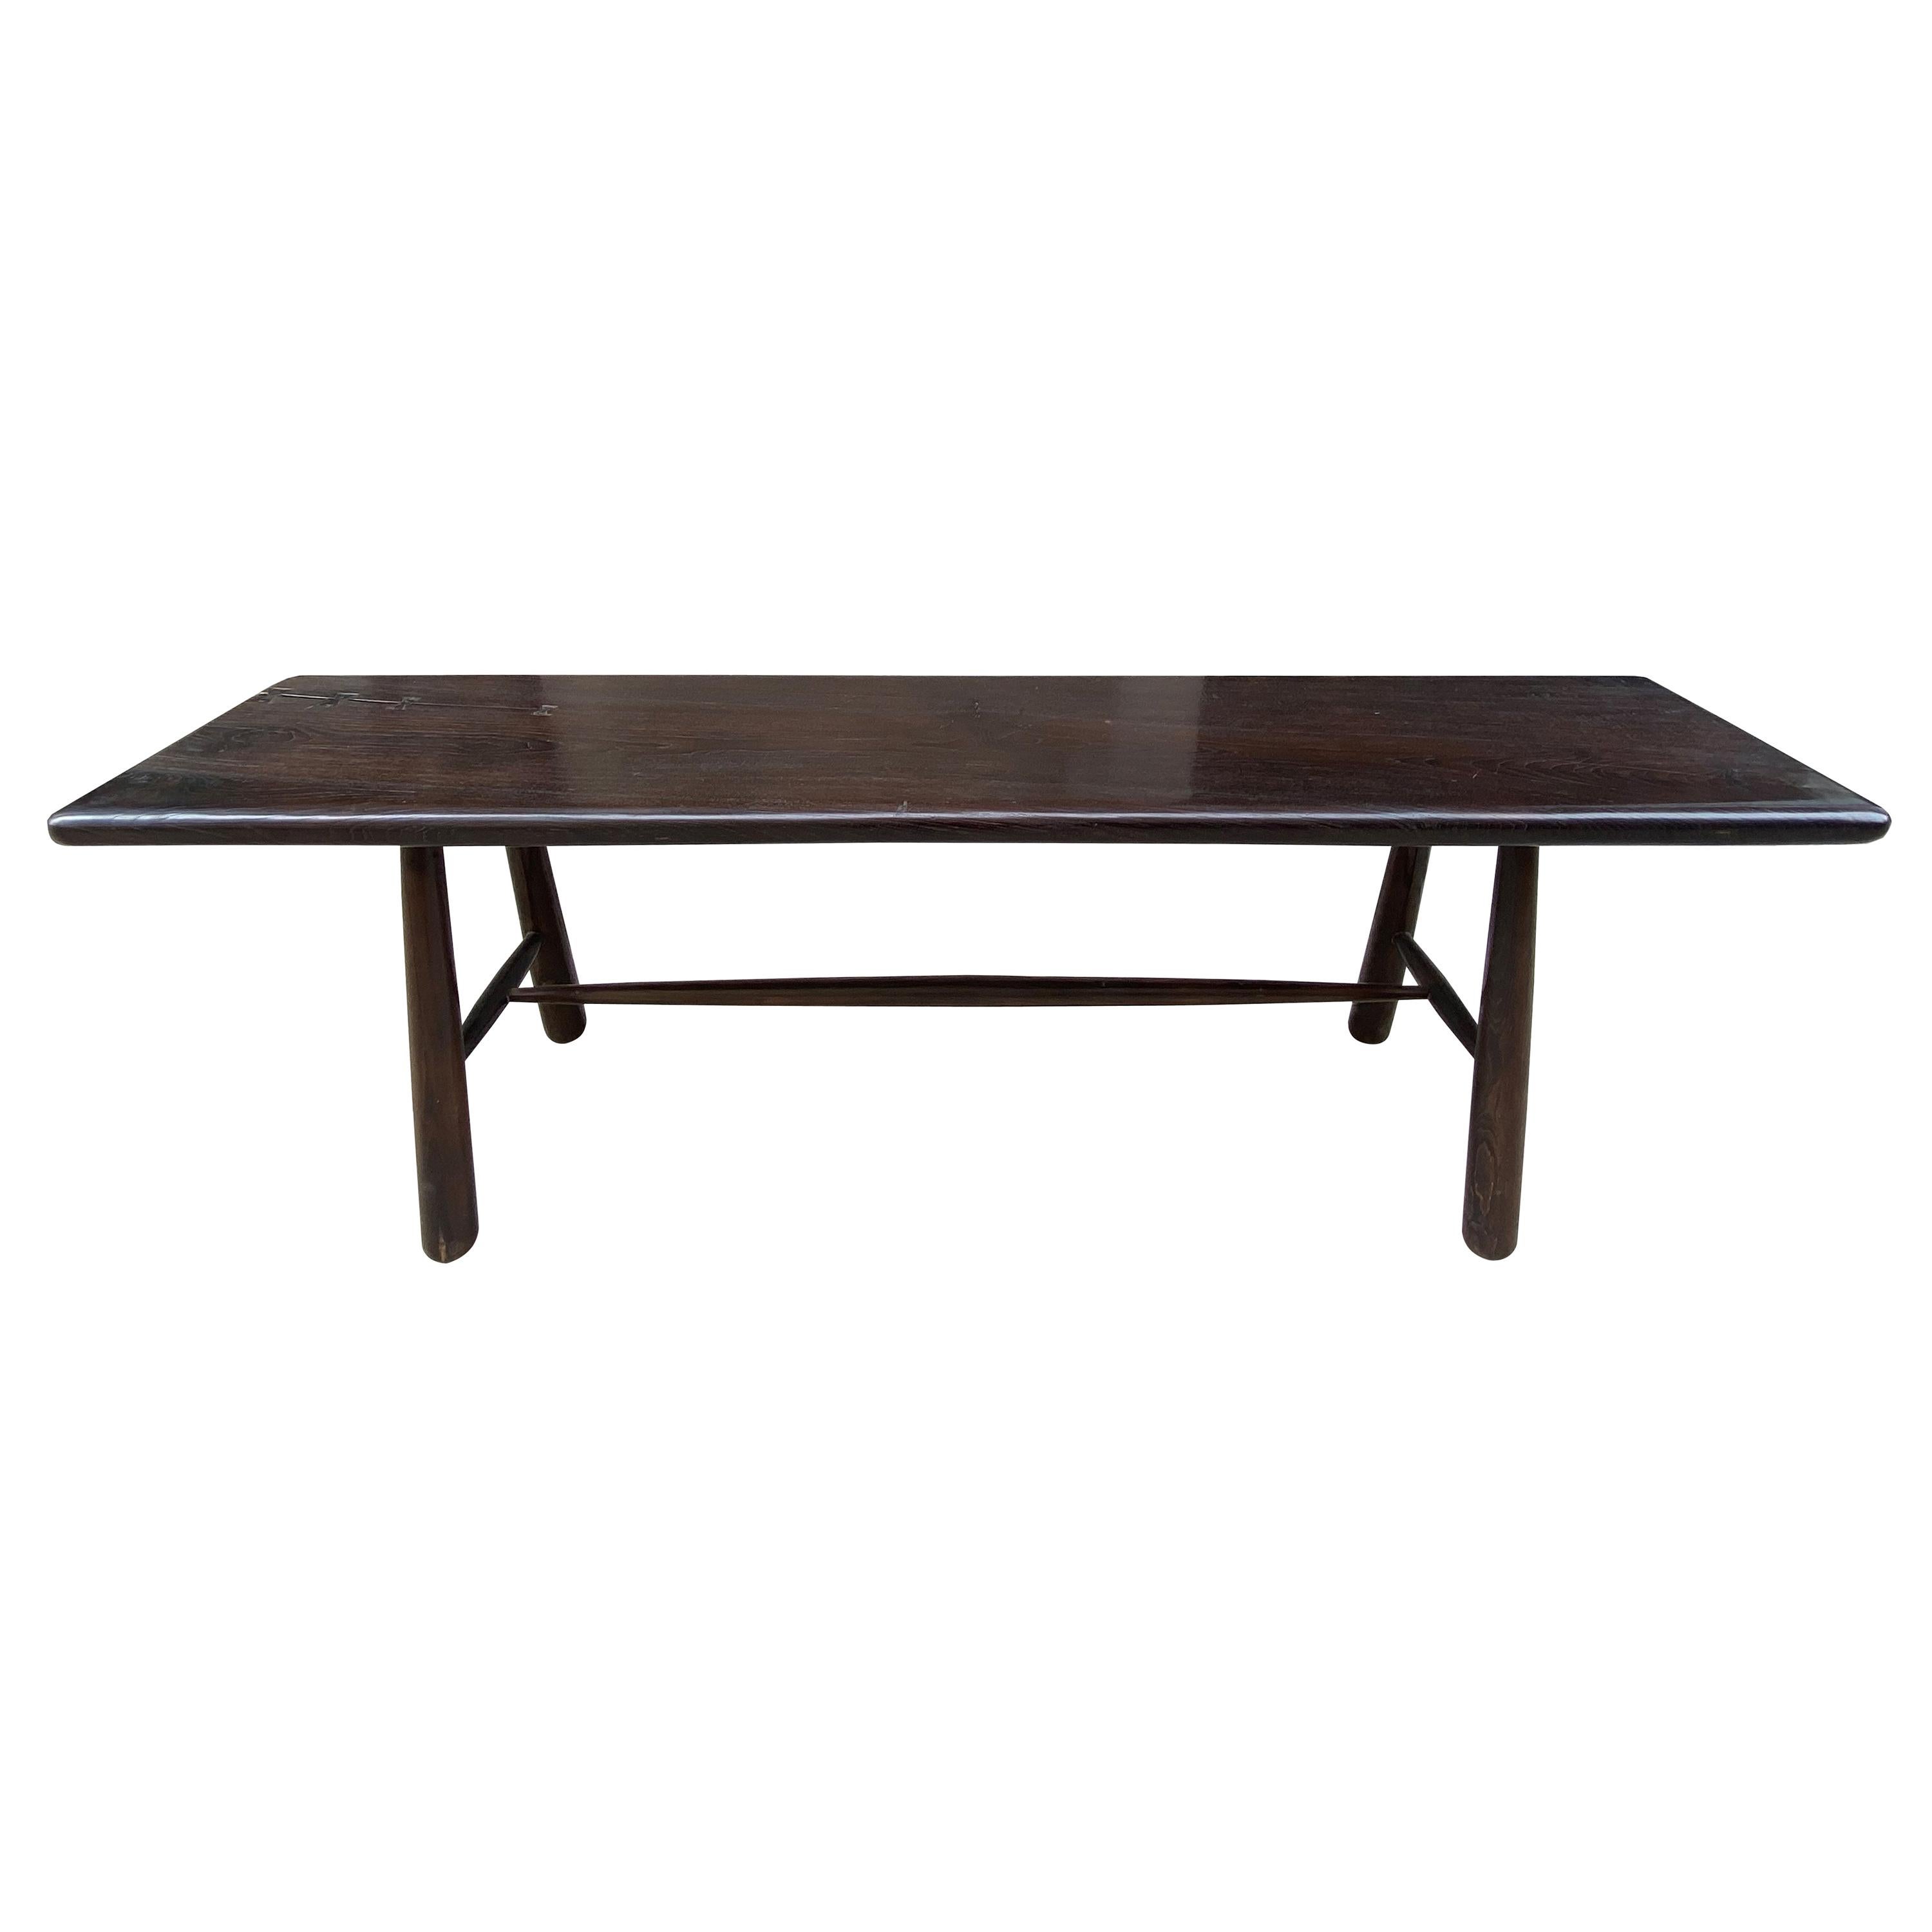 Andrianna Shamaris Midcentury Couture Espresso Stained Teak Wood Console Table For Sale